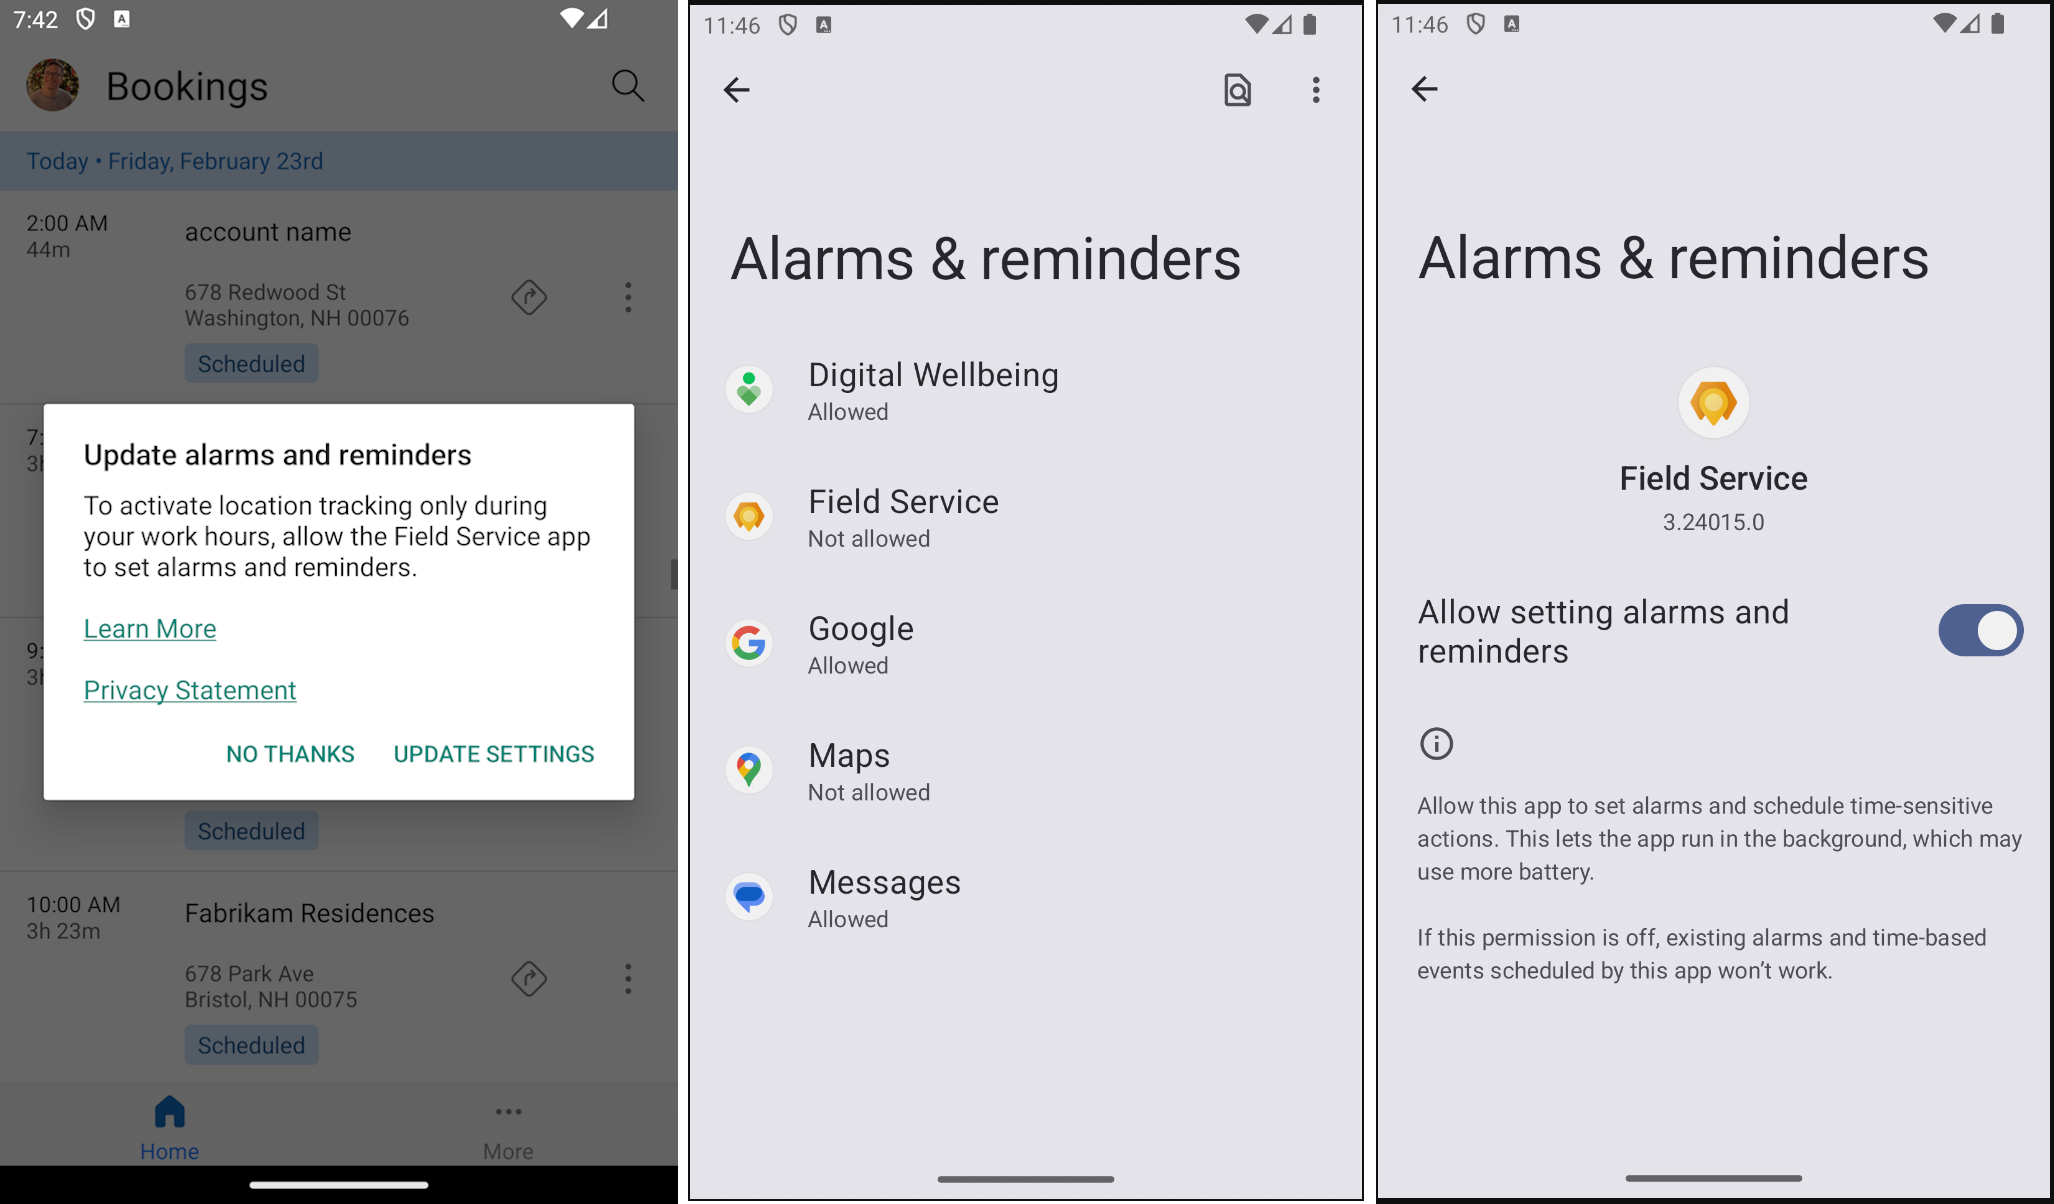 Dialog asking for permissions to alarms and reminders.